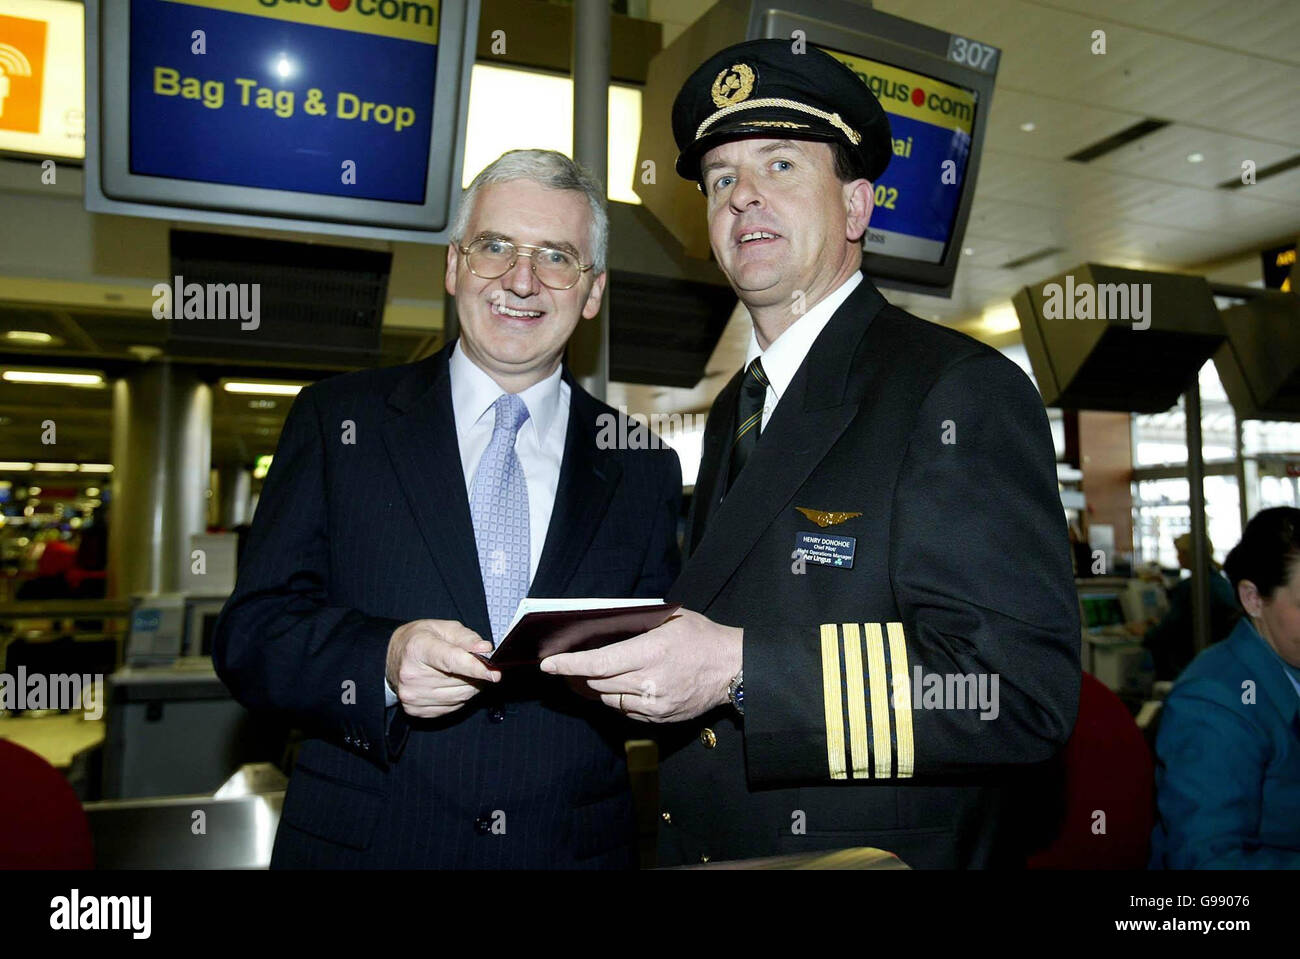 Aer Lingus Chief executive Dermot Mannion (left) and Chief Pilot Henry Donohue at Dublin Airport, Tuesday 28 March 2006 as Aer Lingus made history today with its first long-haul eastern flight to Dubai. Launching the new thrice-weekly service, Transport Minister Martin Cullen said it marked a new era in the state airline's growth and development as it embraces privatisation. Dubai is the first eastern-bound and non-US long-haul route in the history of Aer Lingus, which aims to carry 70,000 passengers on the seven-hour flight over the next 12 months. See PA Story AIR Dubai. PRESS ASSOCIATION Stock Photo